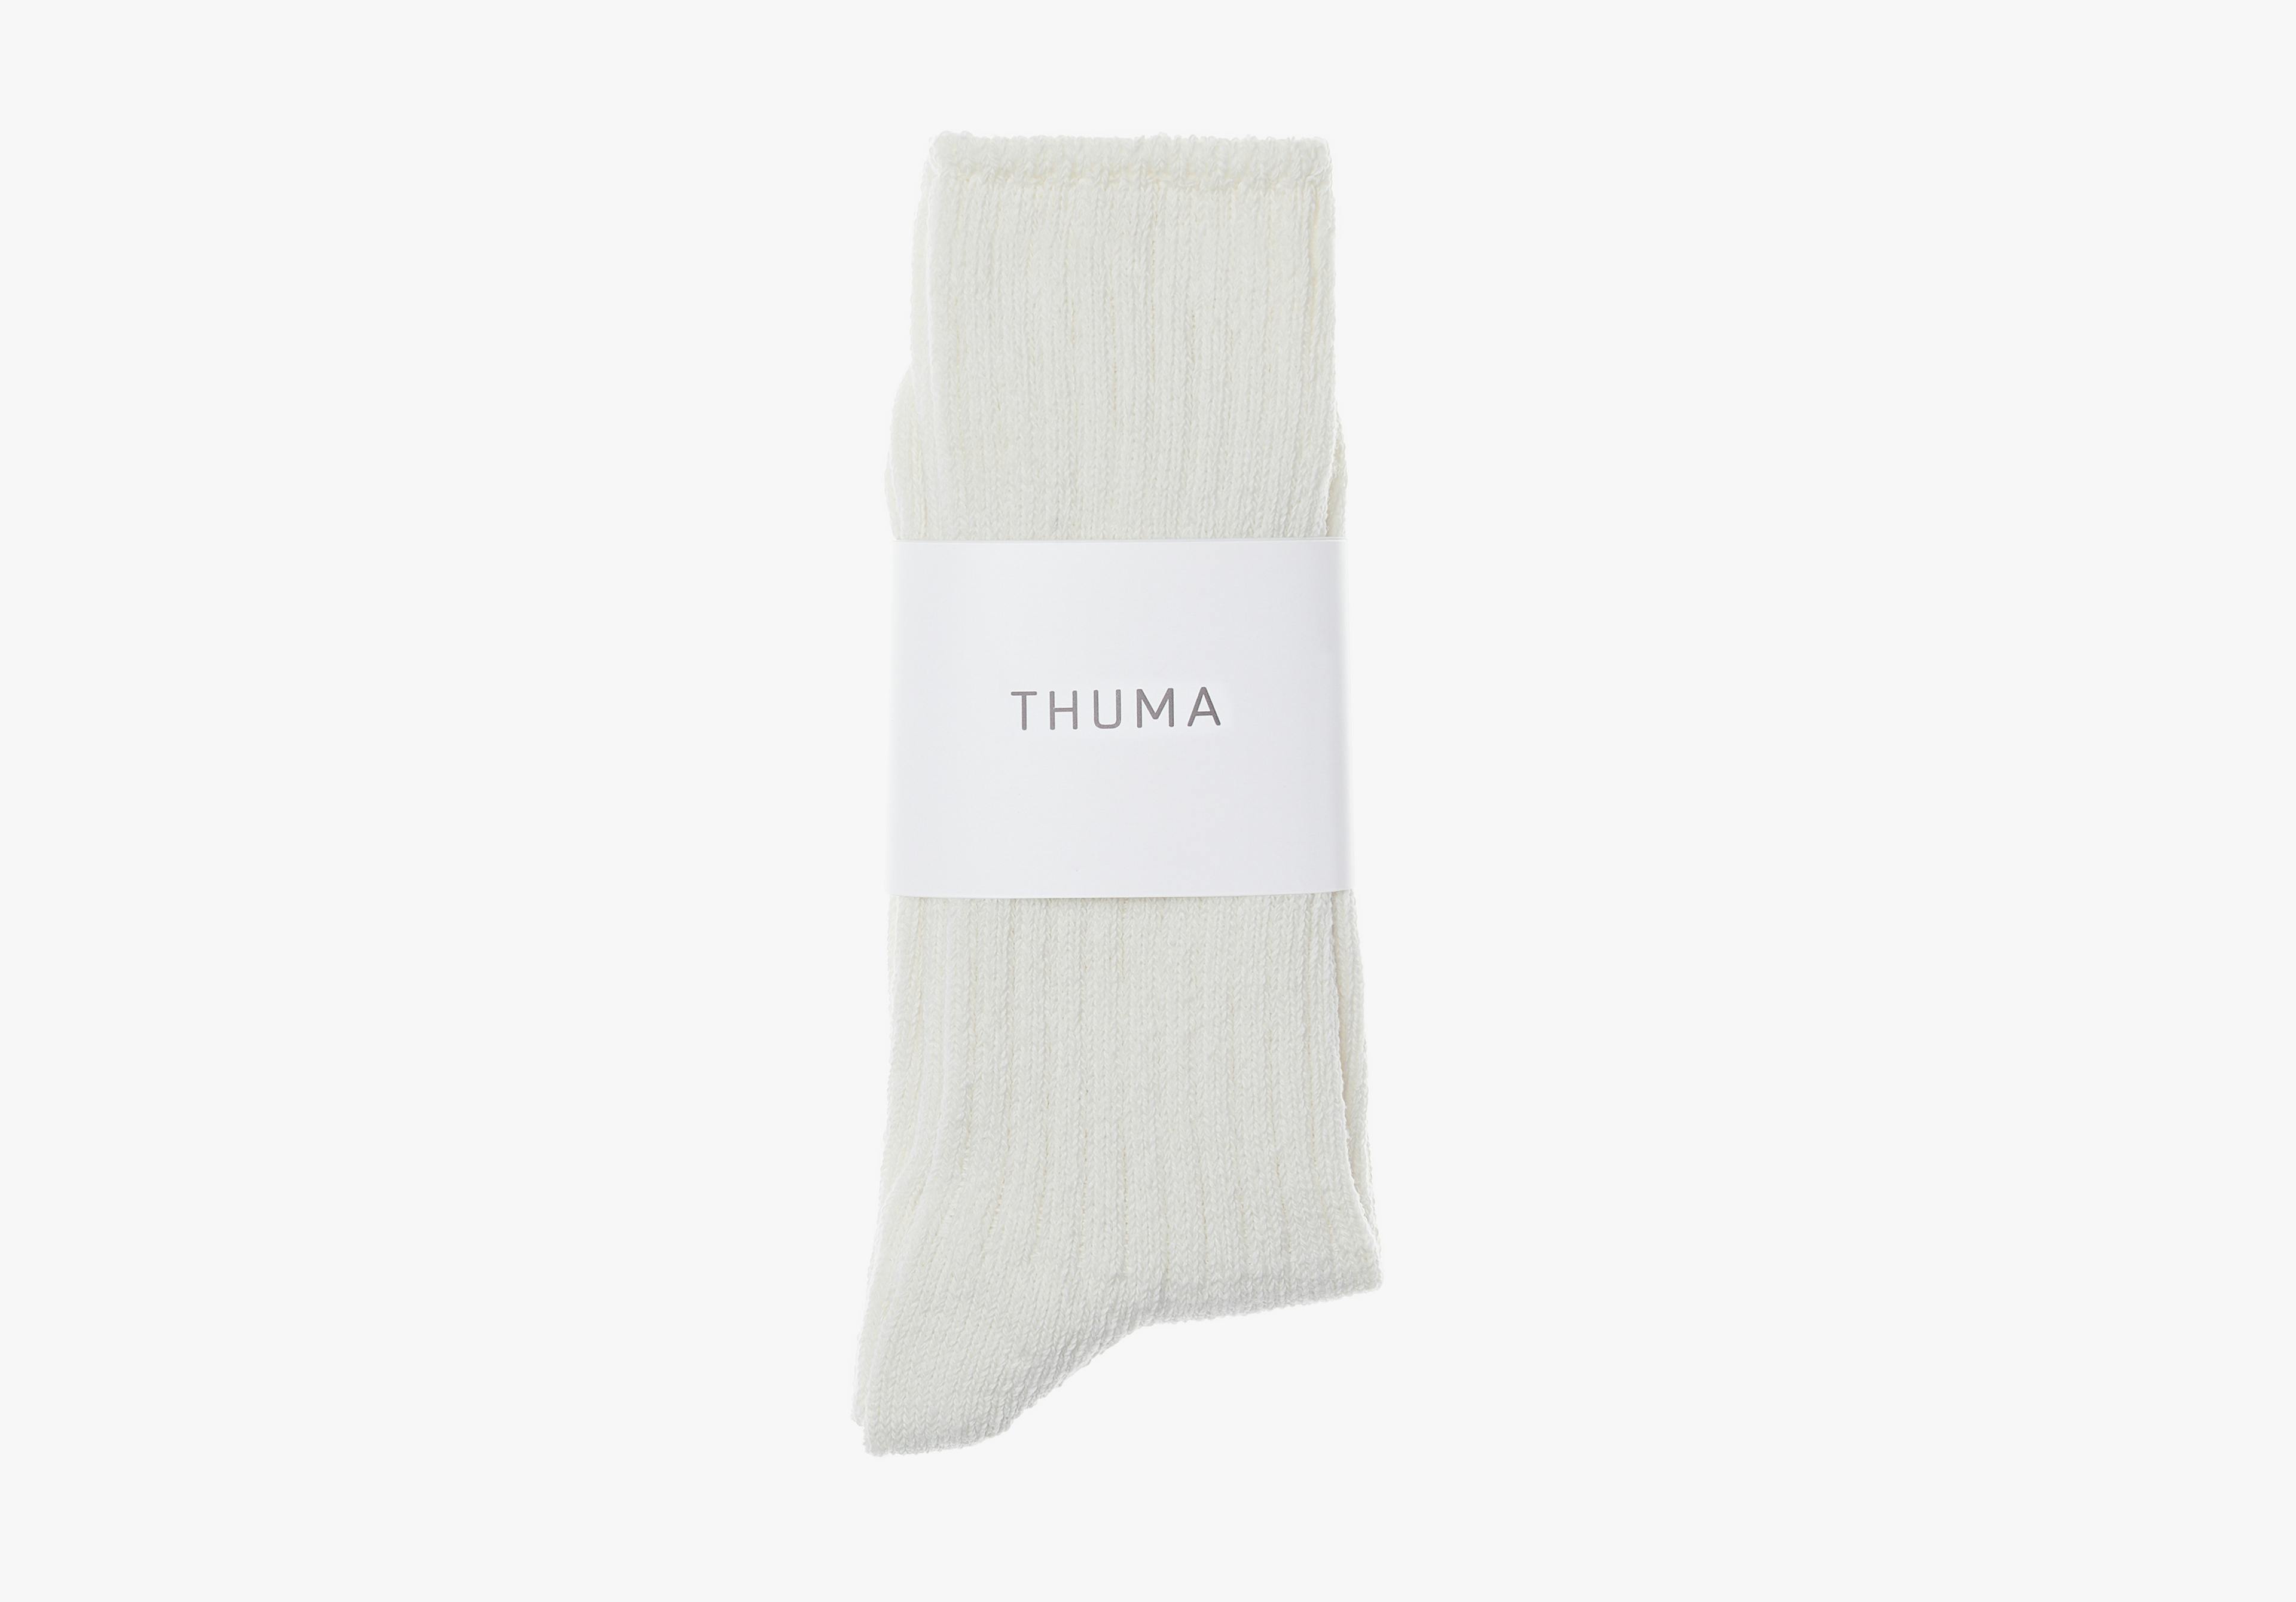 Lounge & Leisure Socks in Natural White Color